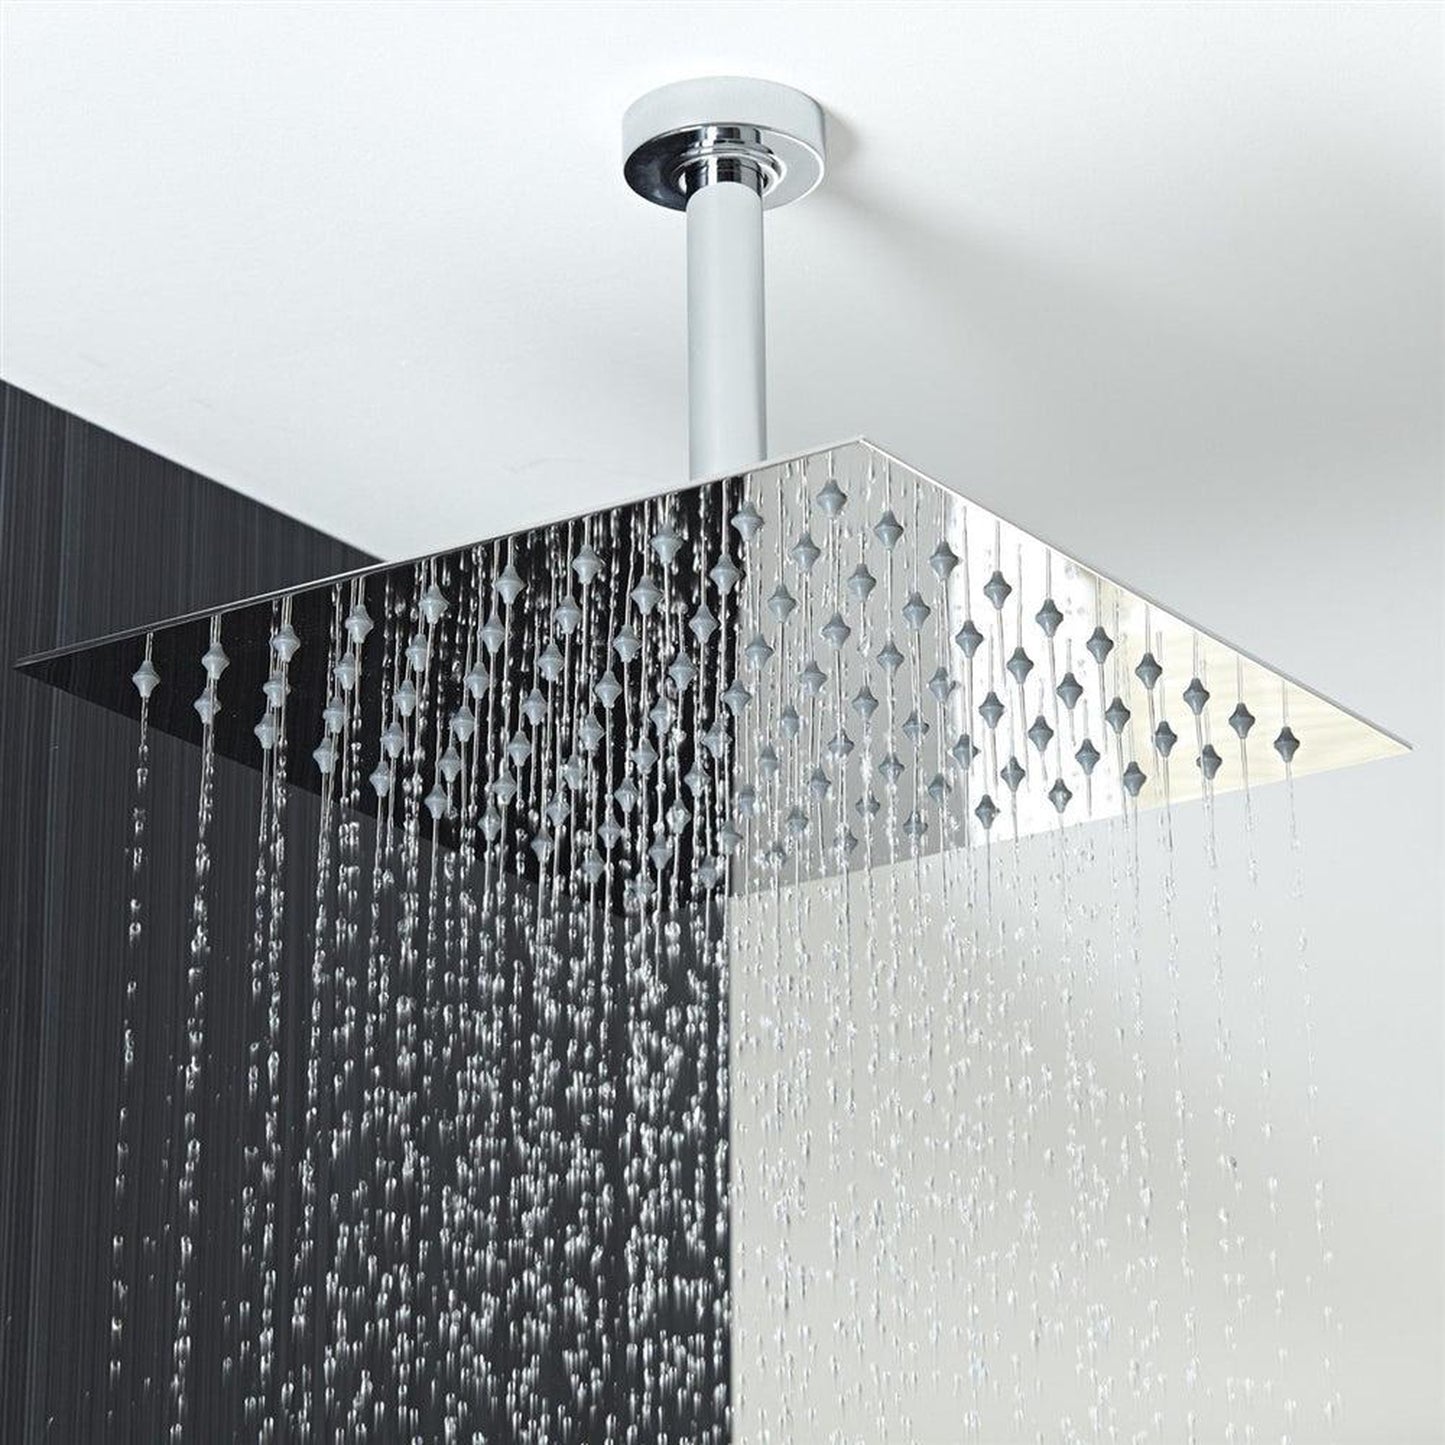 Fontana Liverpool 8" Chrome Square Ceiling Mounted Thermostatic Rainfall Shower System With Hand Shower and With Water Powered LED Lights